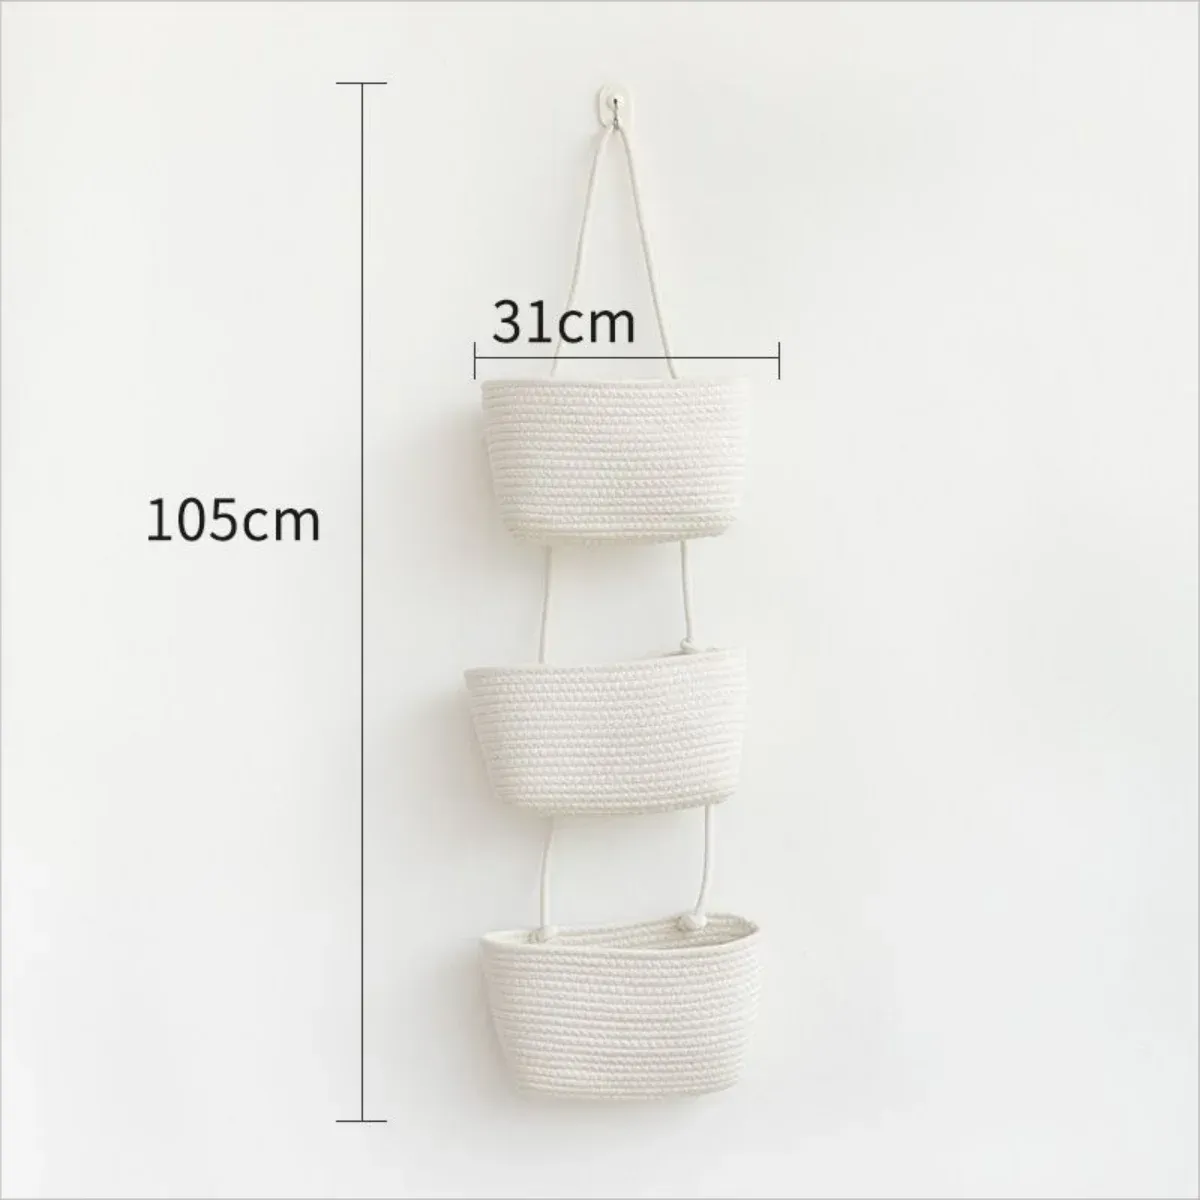 Baskets Wall Hanging Cotton Rope Woven Storage Basket Organizer 3 Tier Multipurpose for Home Bedroom Dormitory Toys Book Organization